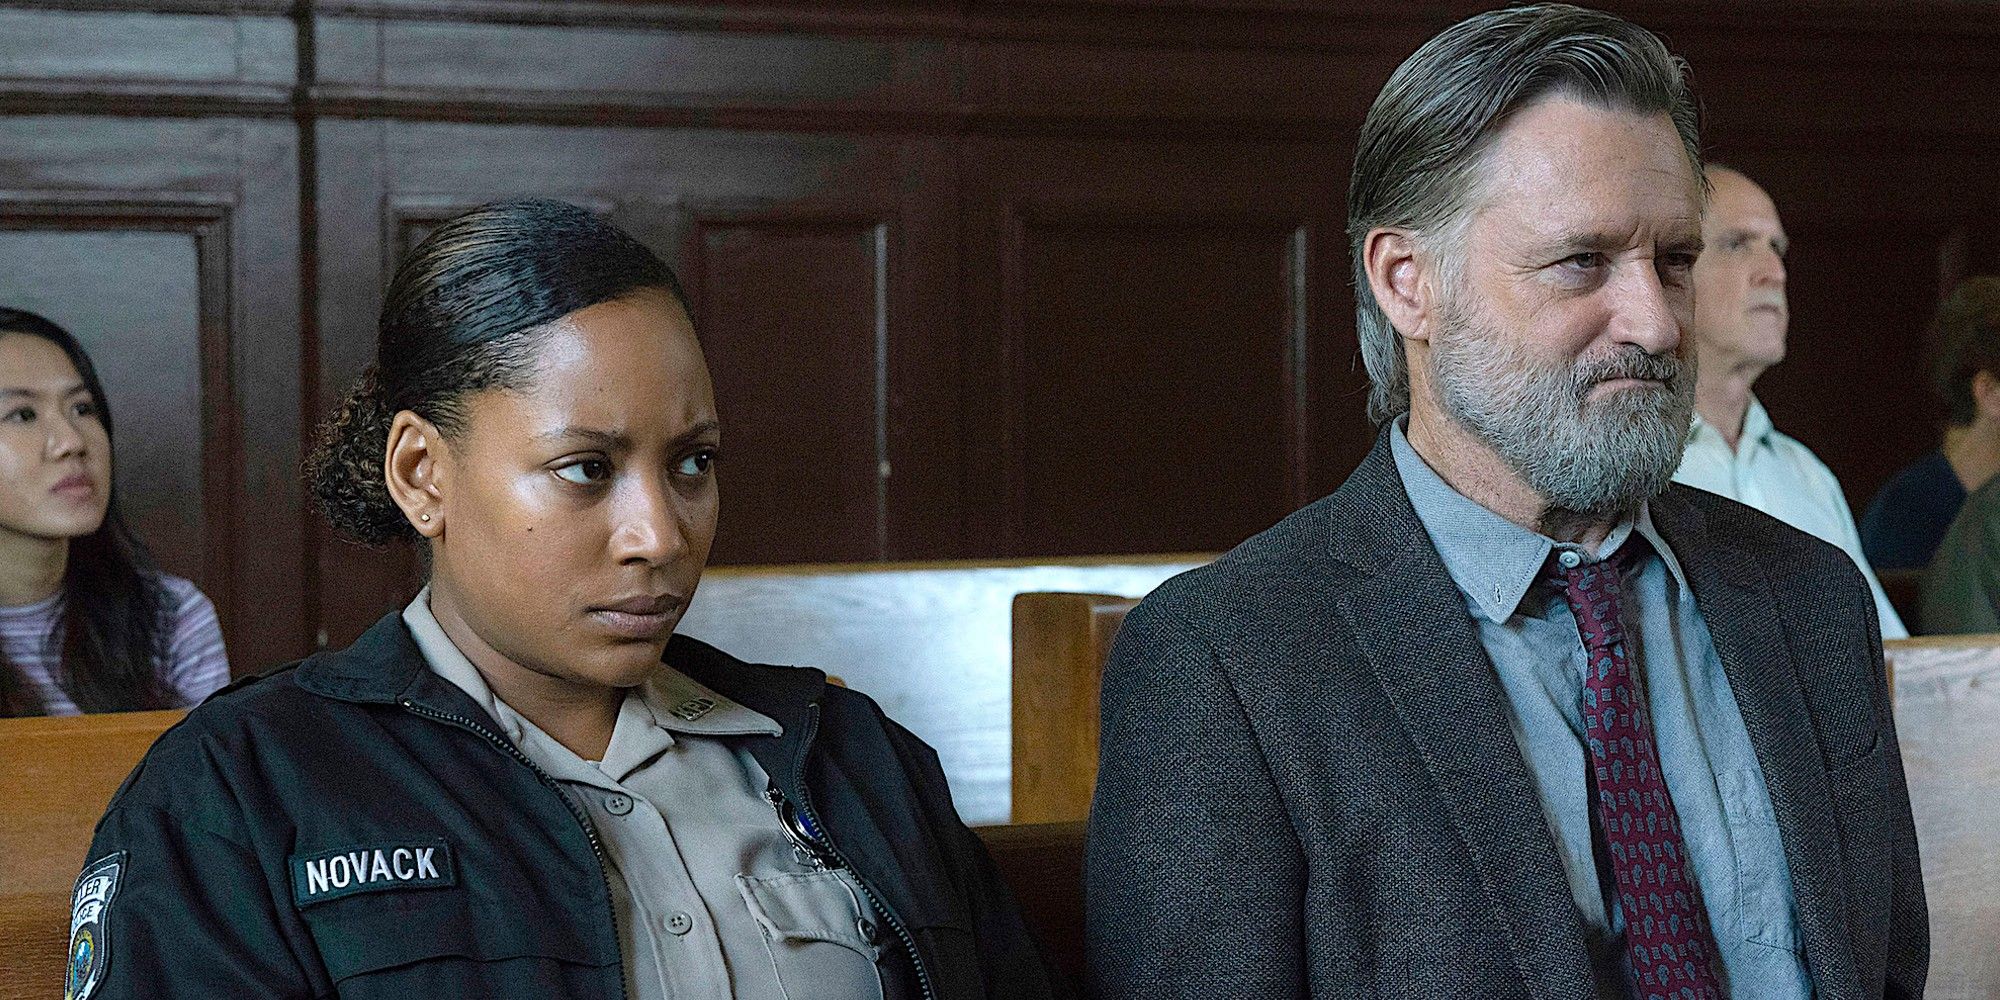 Natalie Paul and Bill Pullman in The Sinner